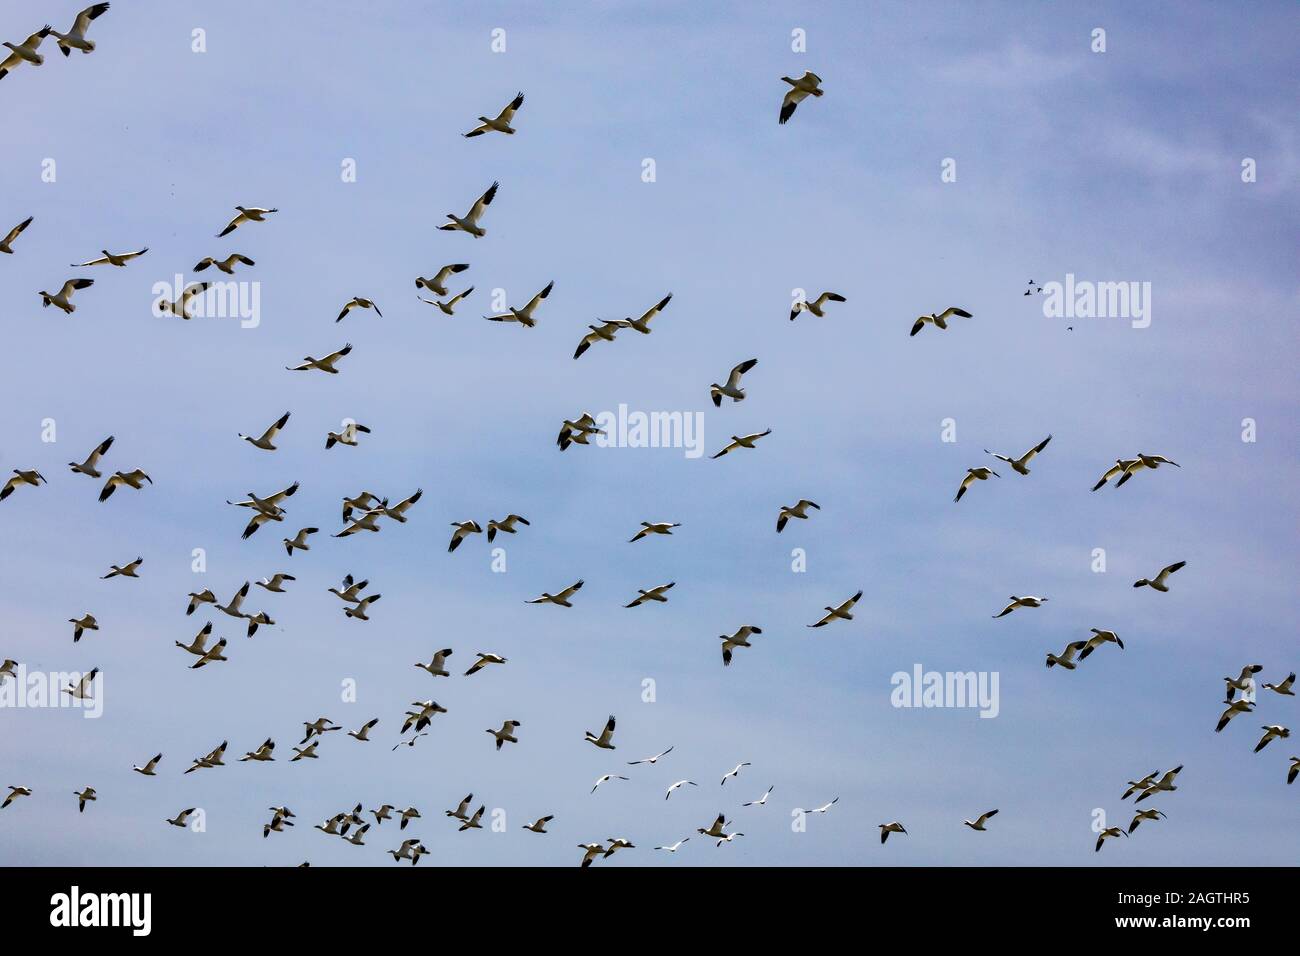 Snow and Ross's geese take flight at the Meced National Wildlife Refuge in the Central Valley of California USA Stock Photo